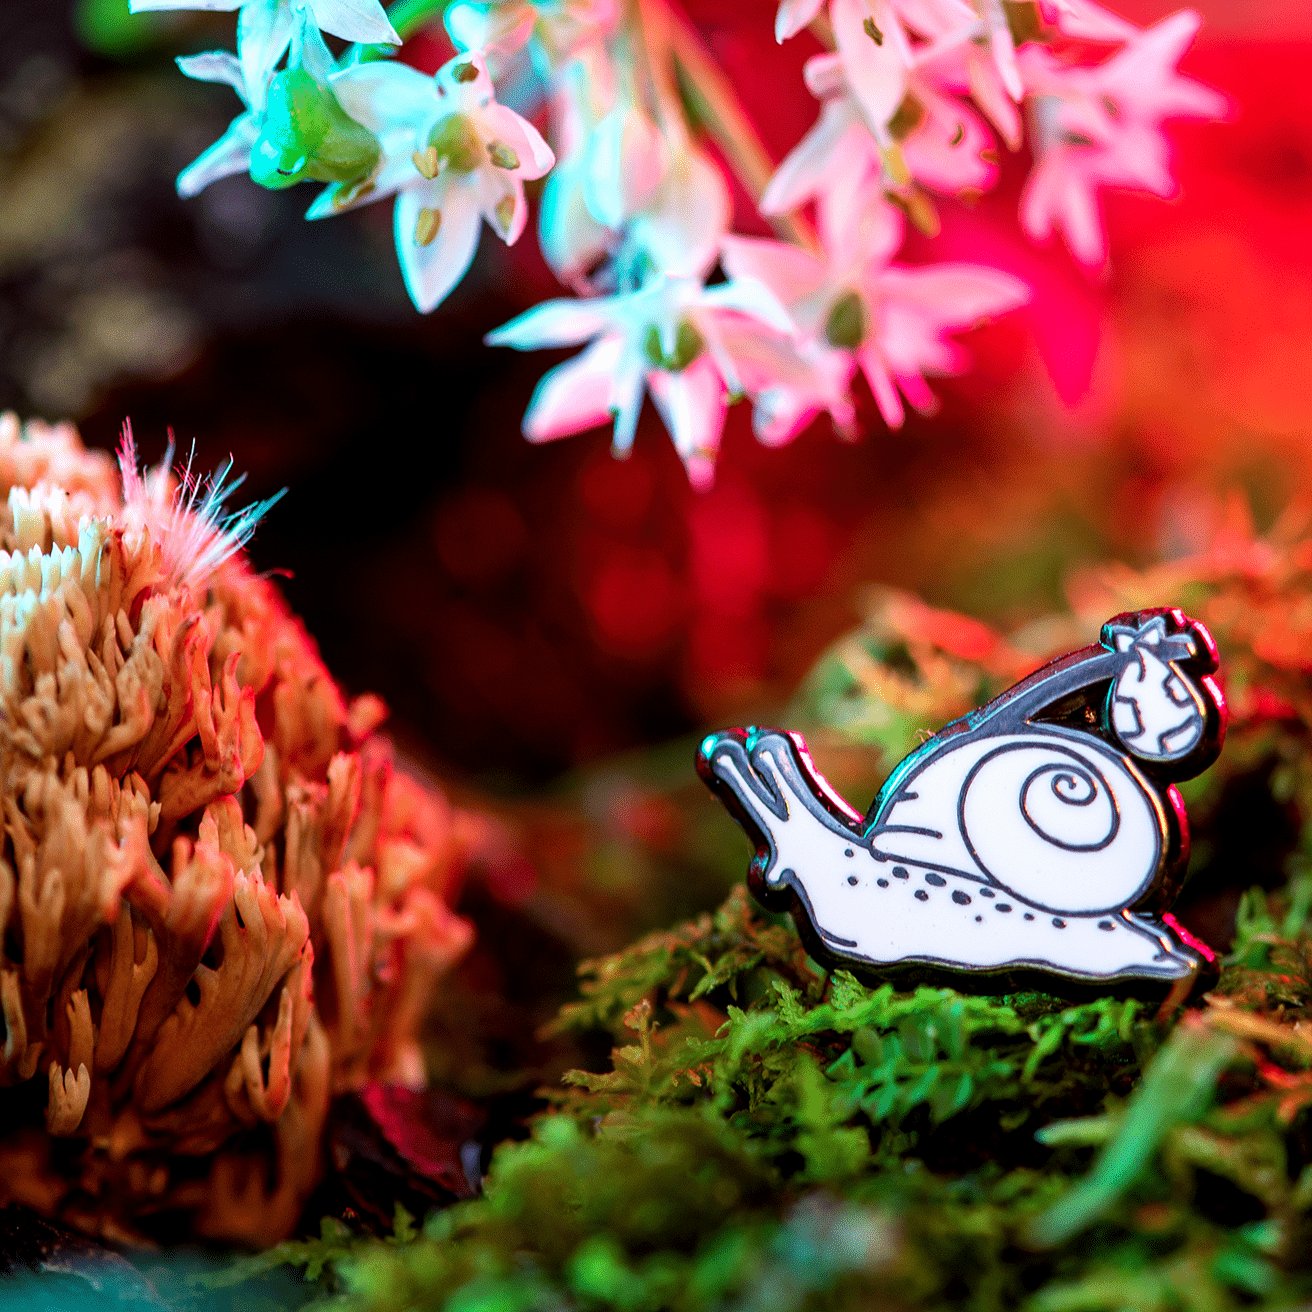 Rover the Snail Mini Pin by The Roving House Snail pin, featuring a hobo or runaway snail with a bindle exploring the moss, mushrooms, and garlic flowers.